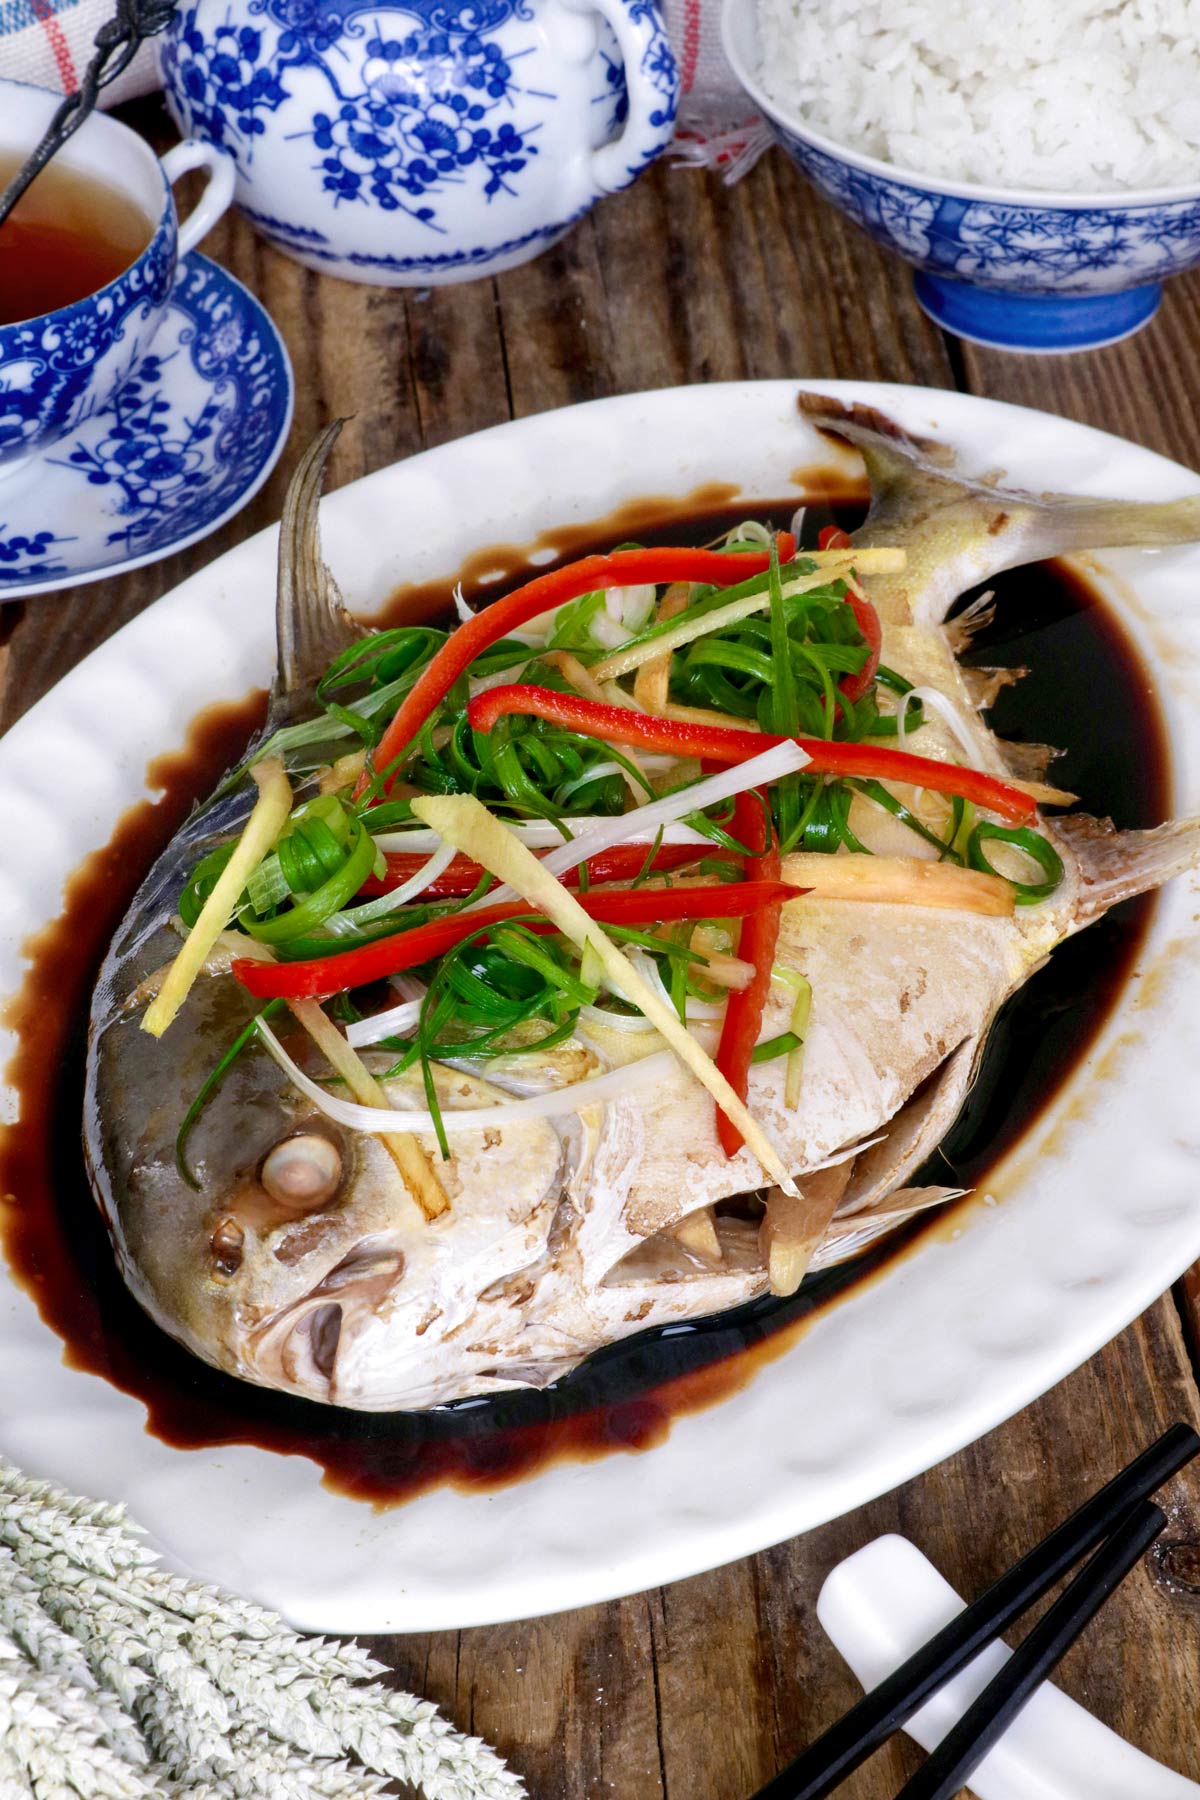 Whole steamed fish cooked Chinese style with soy sauce-wine mixture sauce in a serving platter.